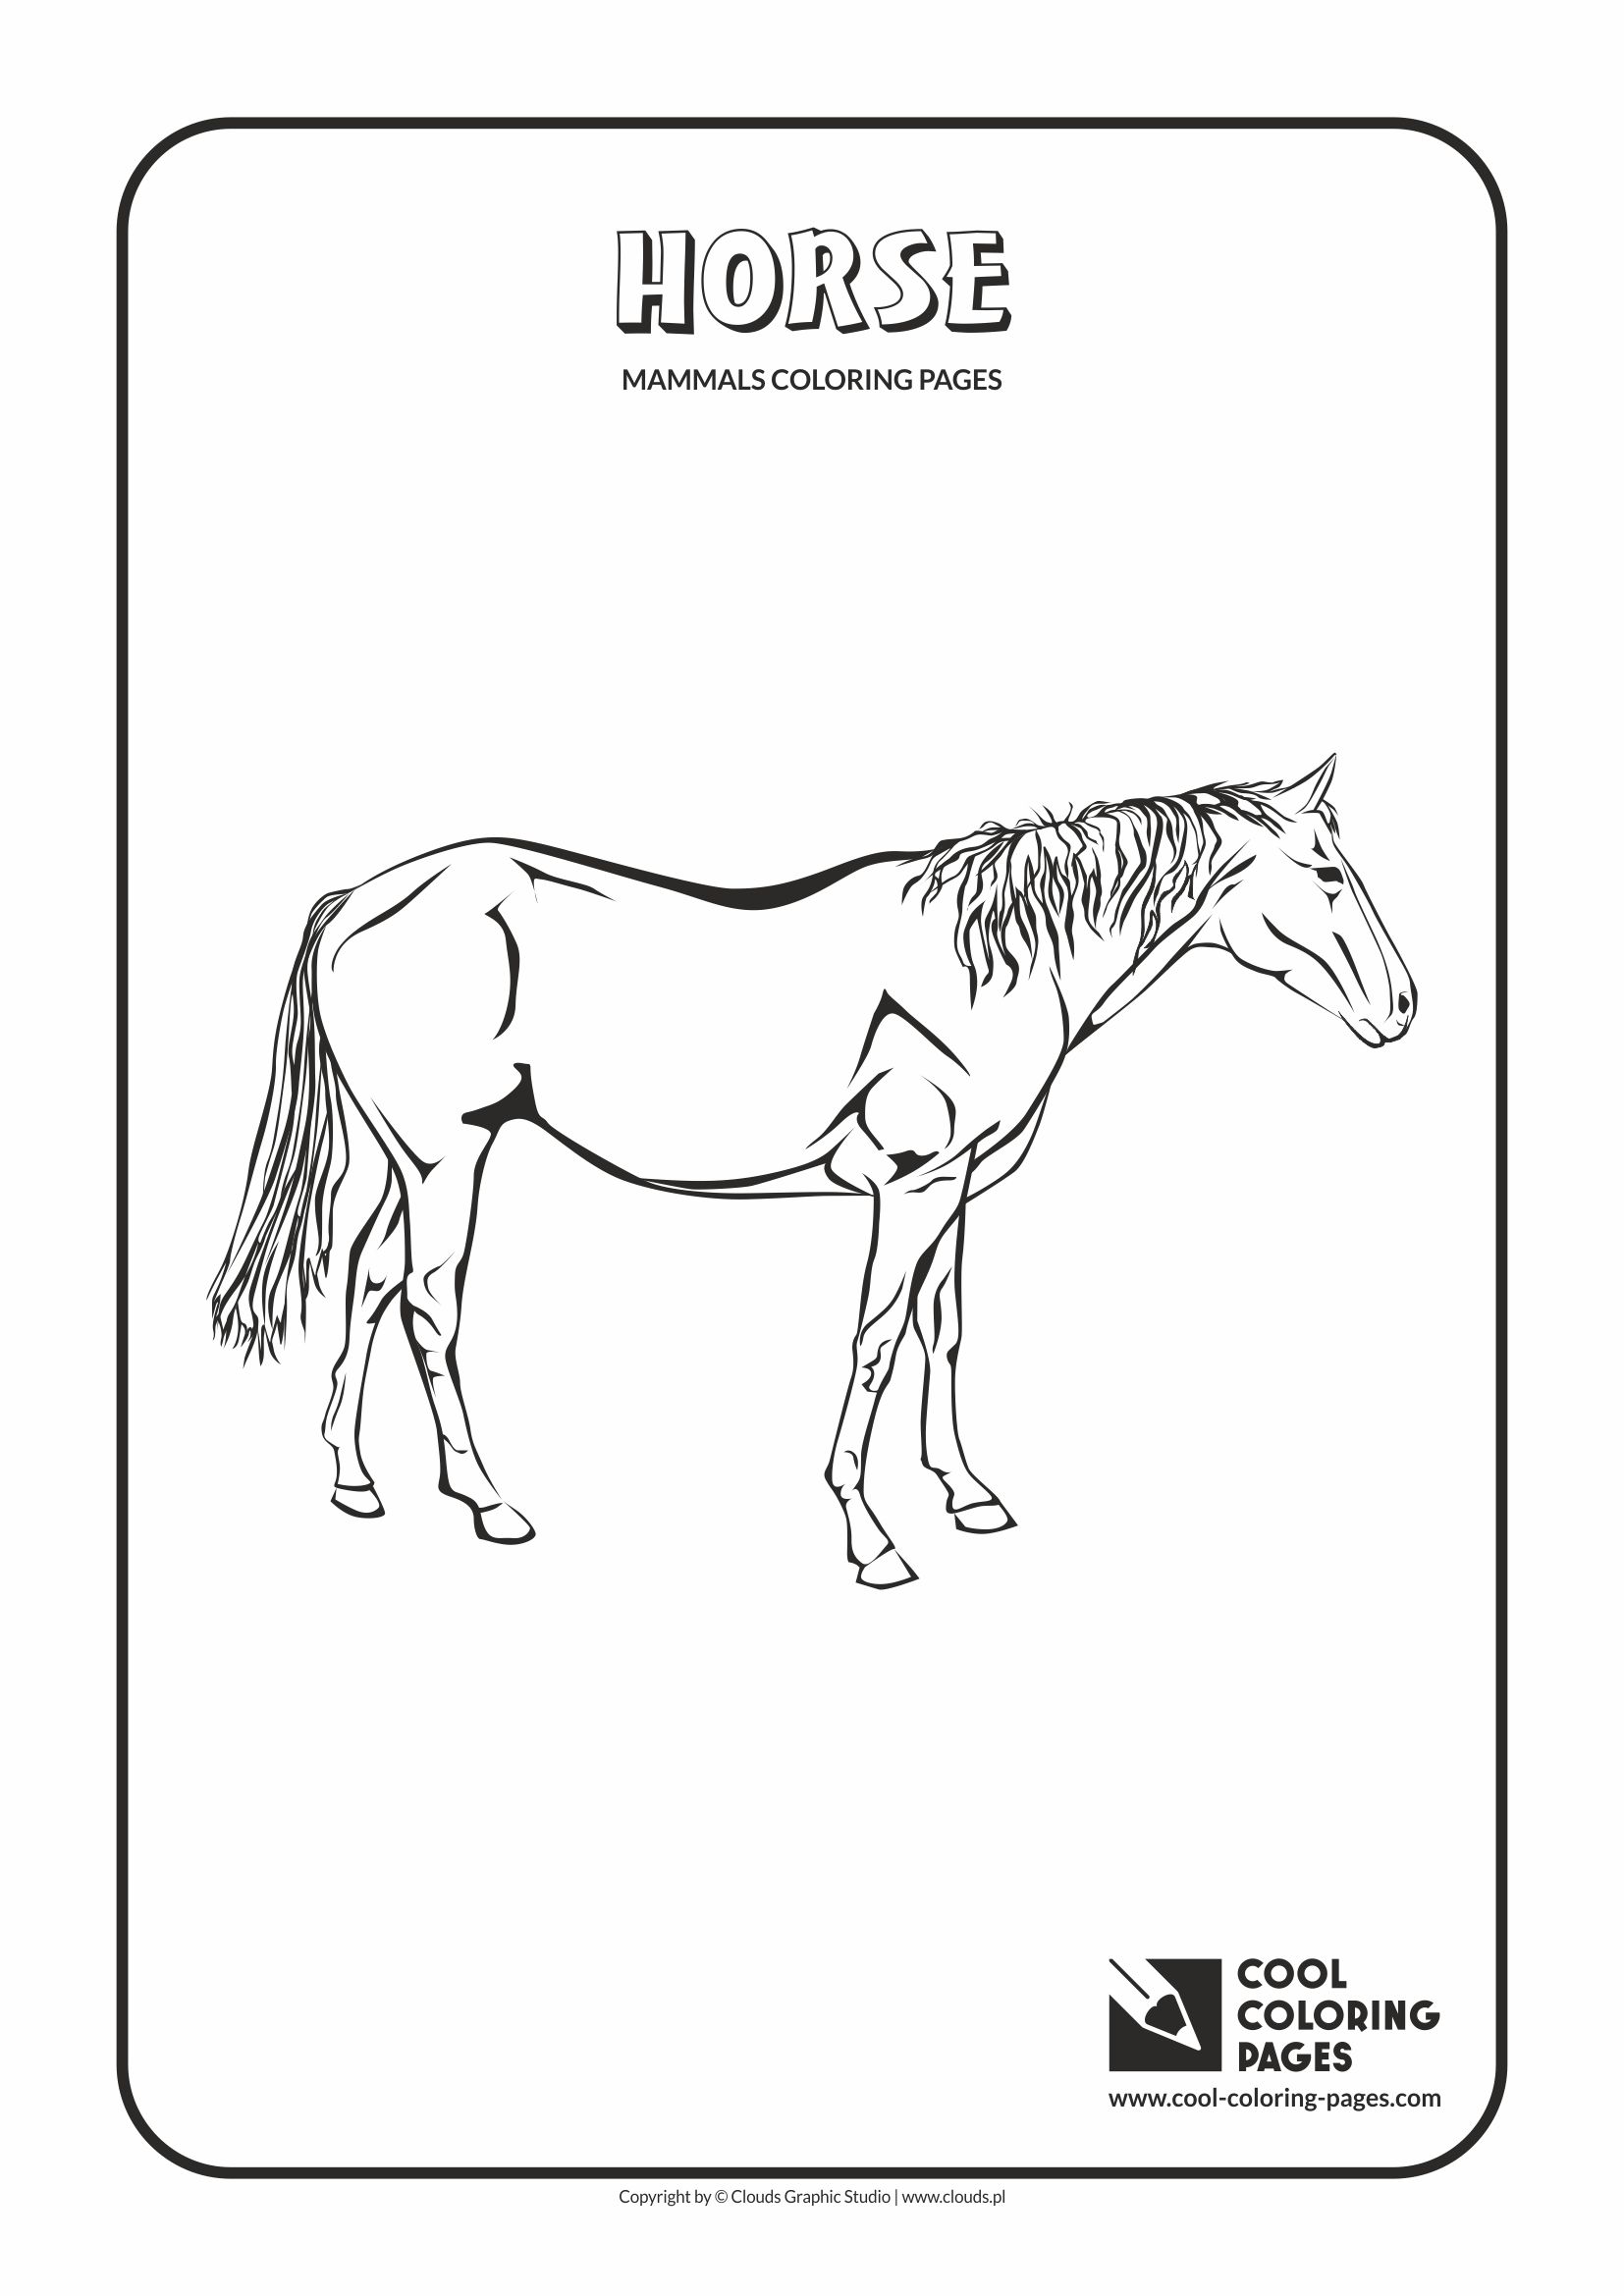 Cool Coloring Pages - Animals / Horse / Coloring page with horse